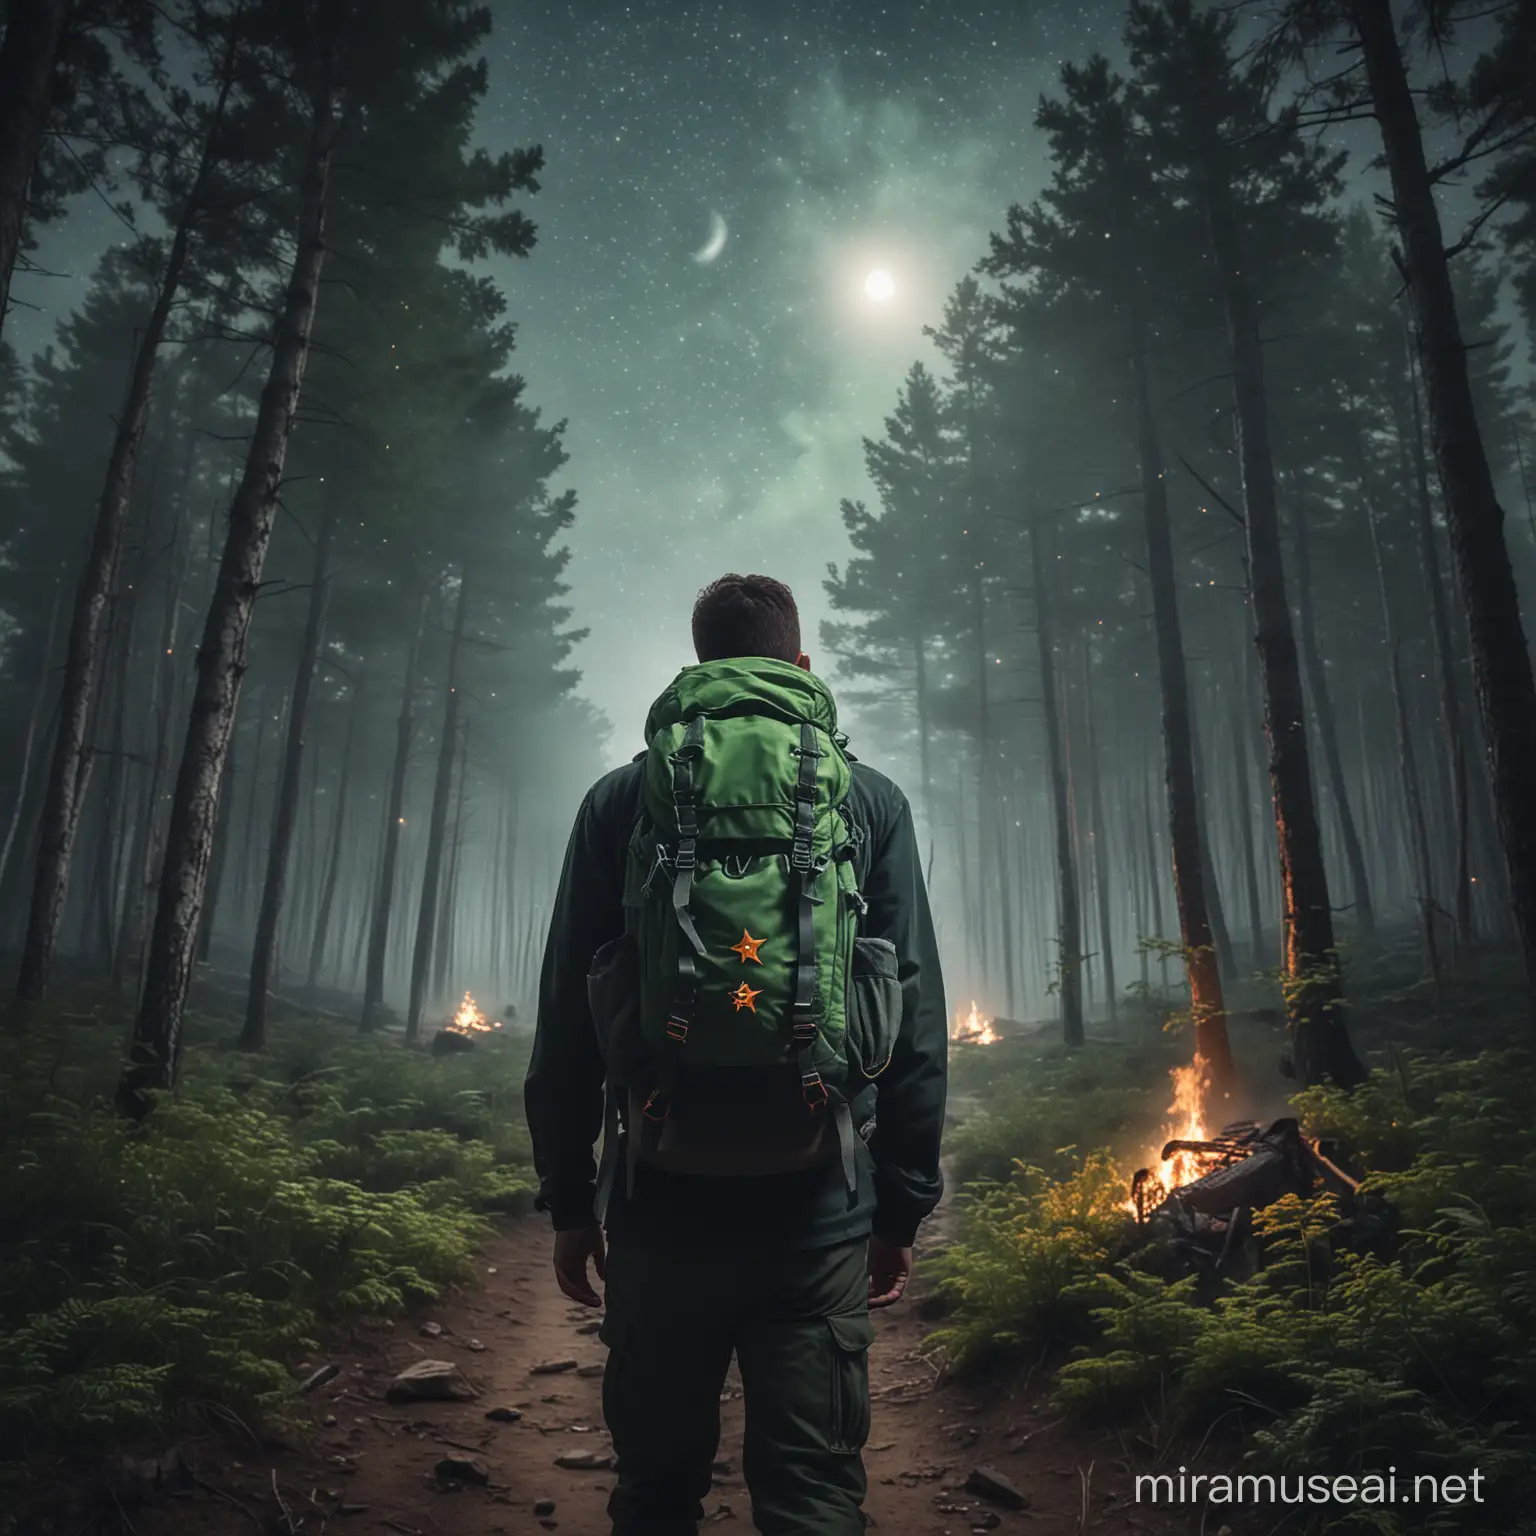 Hiker with Green Backpack Amidst Forest Campfire under Starlit Sky